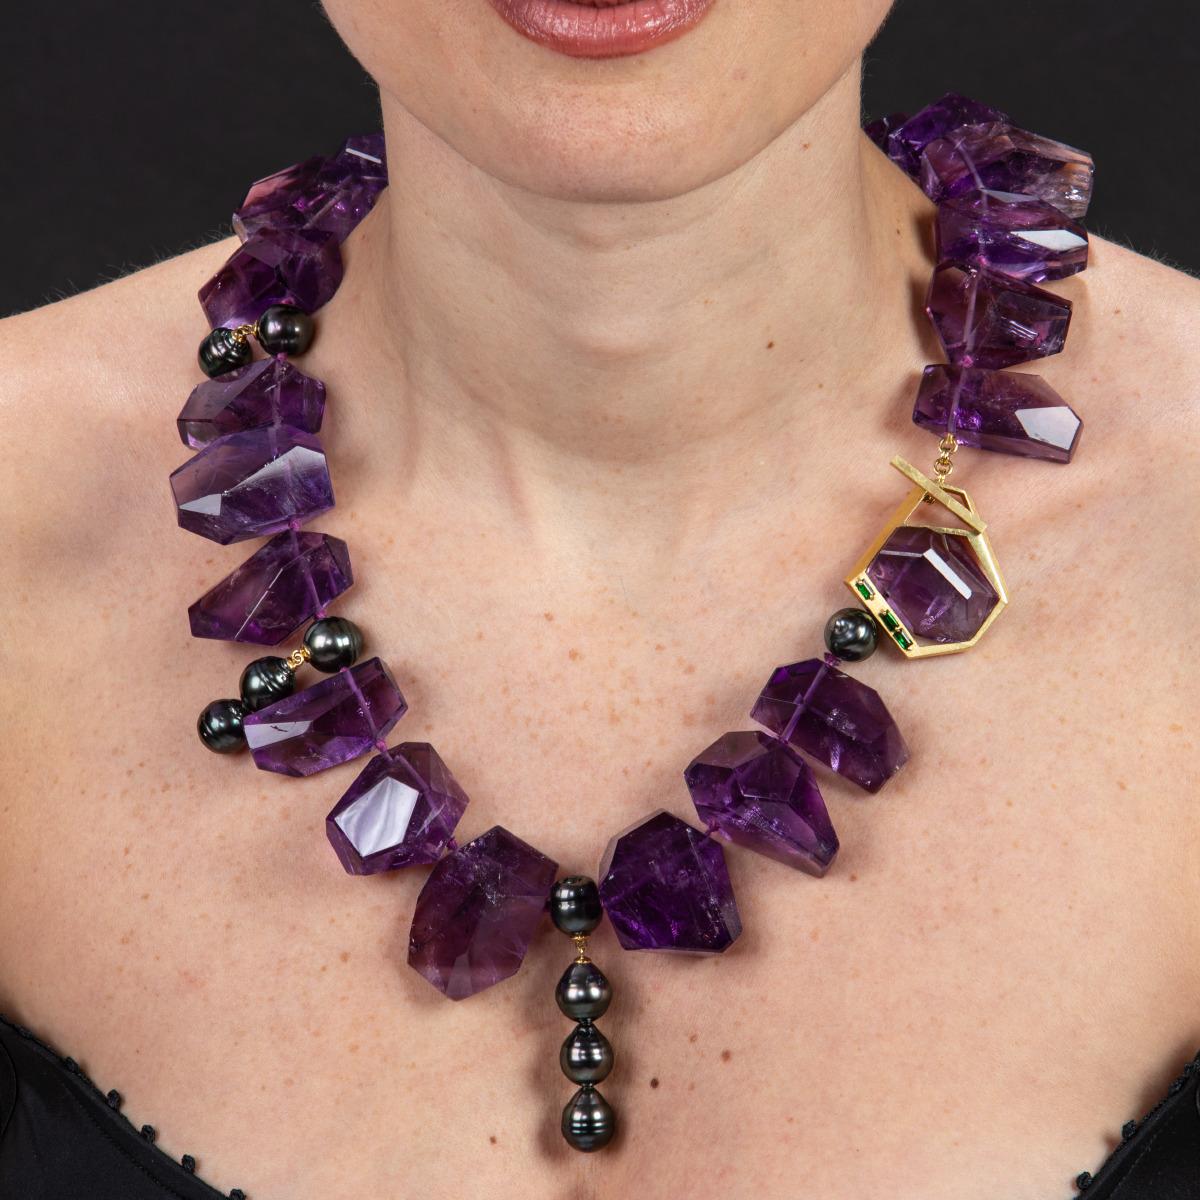 This magnificent necklace is bursting with rich colour that is sure to stand out. Free form purple amethyst stones are strung together in various cuts and sizes for effect and are interspersed with small strands of baroque Tahitian pearls for an